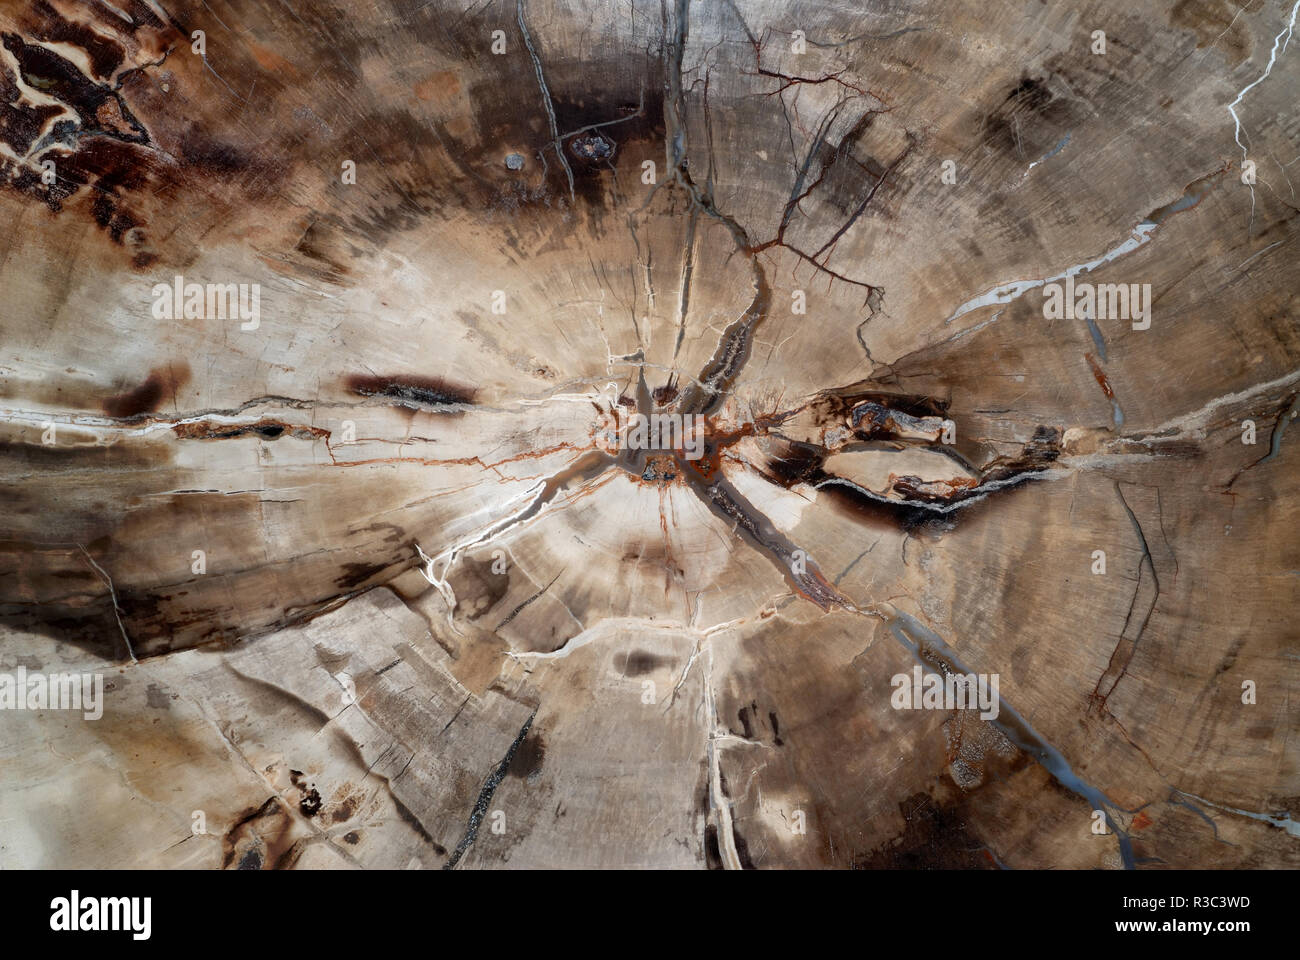 Natural background, cross section through fossilized wood Stock Photo